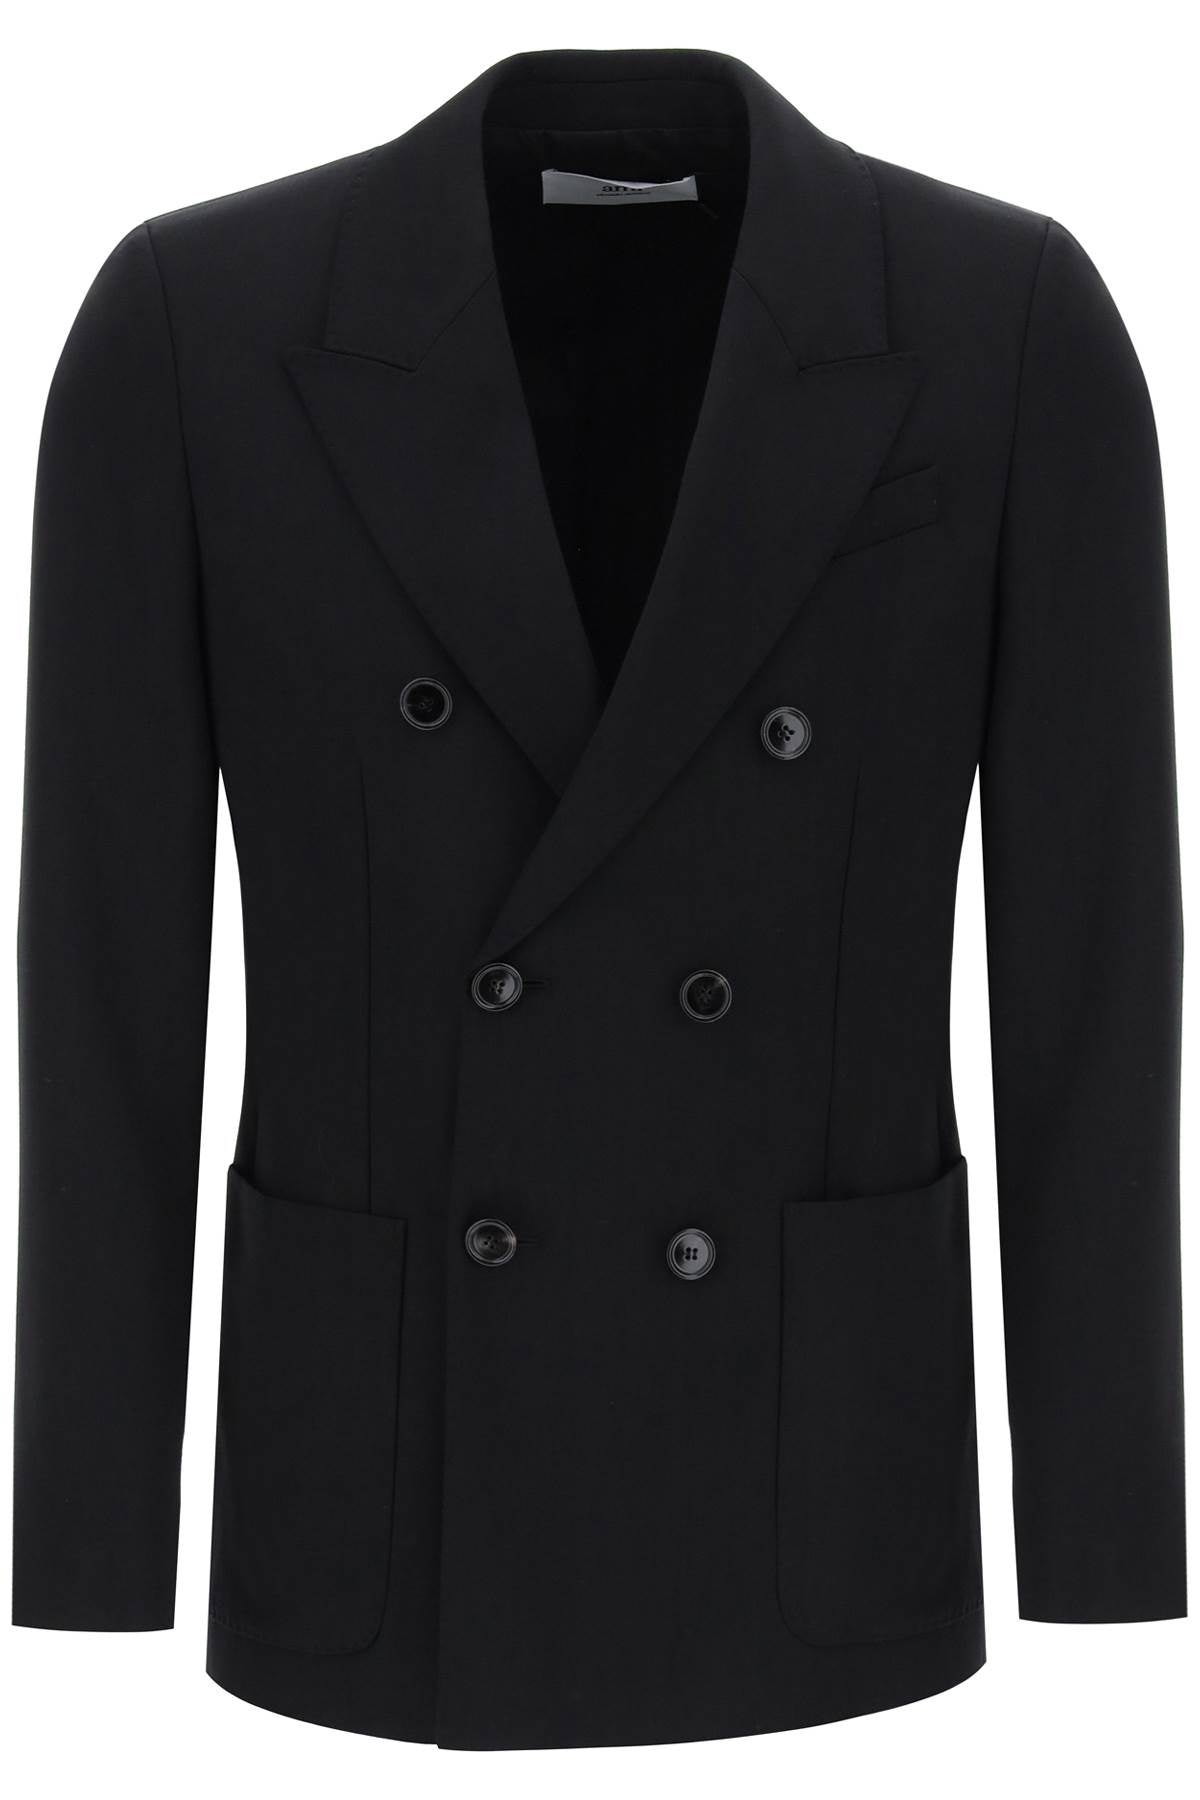 Ami paris double-breasted wool jacket for men-0